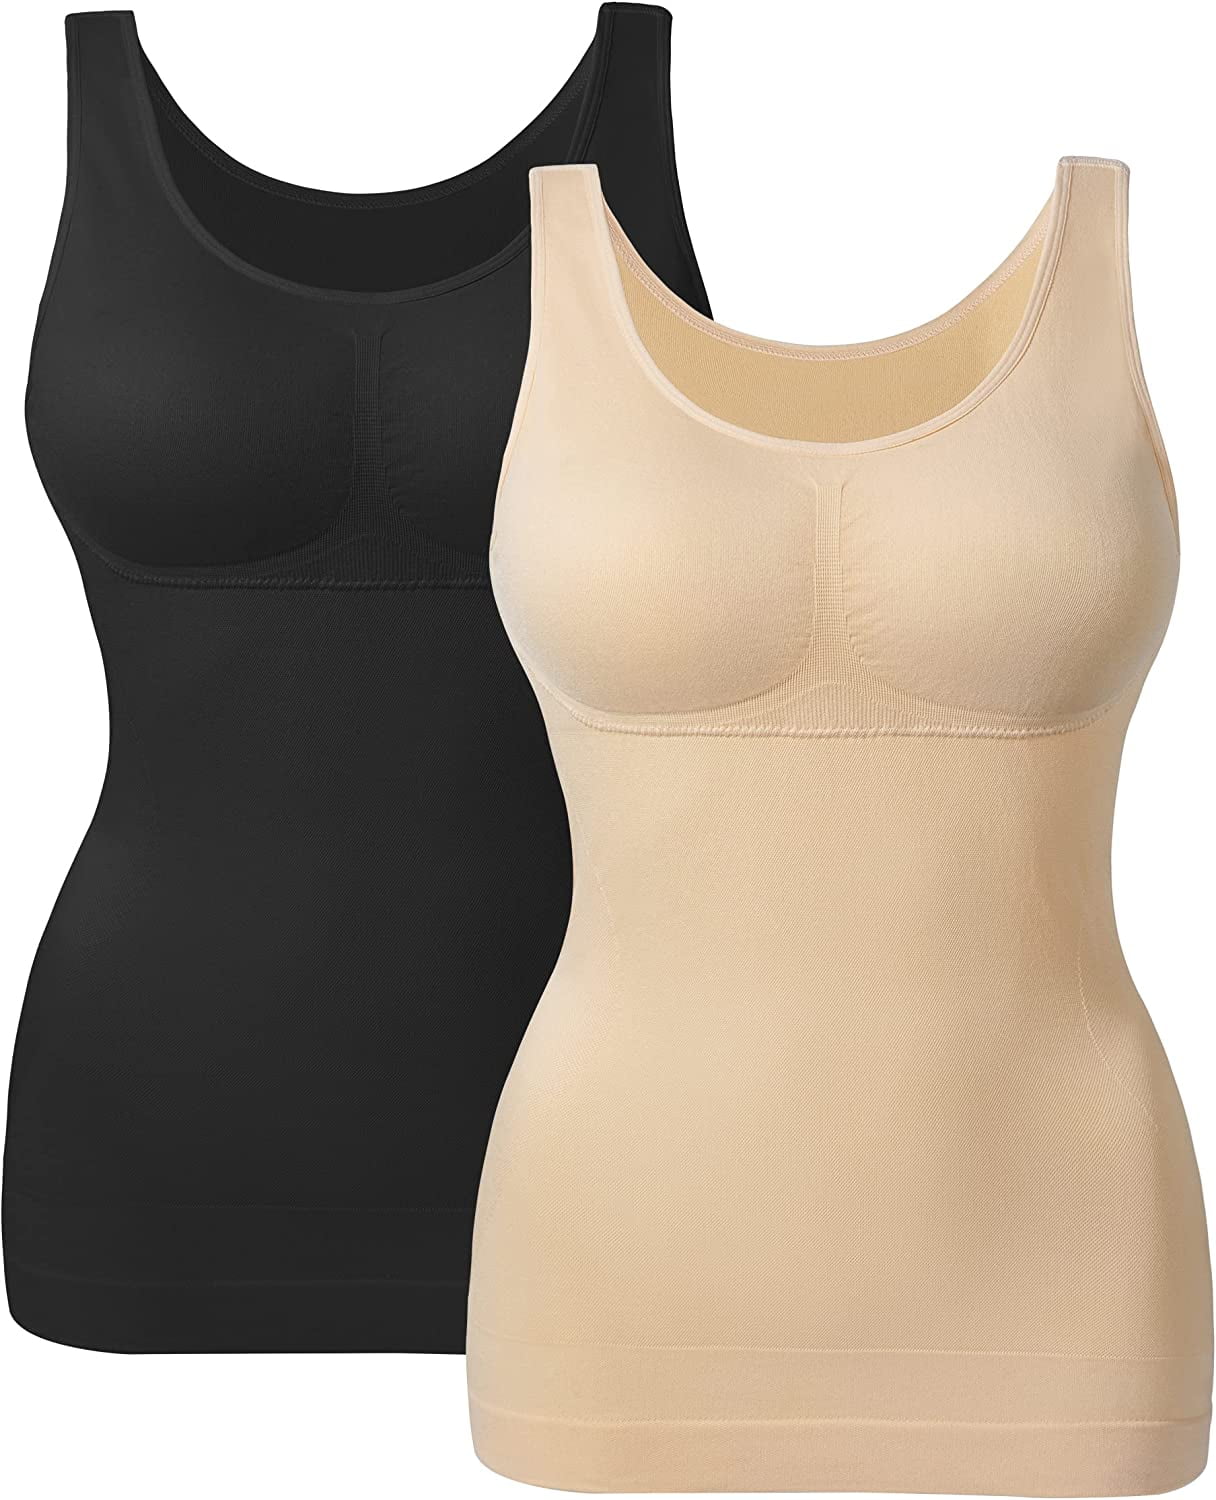 MANIFIQUE 2 Packs Women's Tummy Control Shapewear Tank Tops with Built in Bras  Seamless Compression Tops Slimming Body Shaper Camisole 